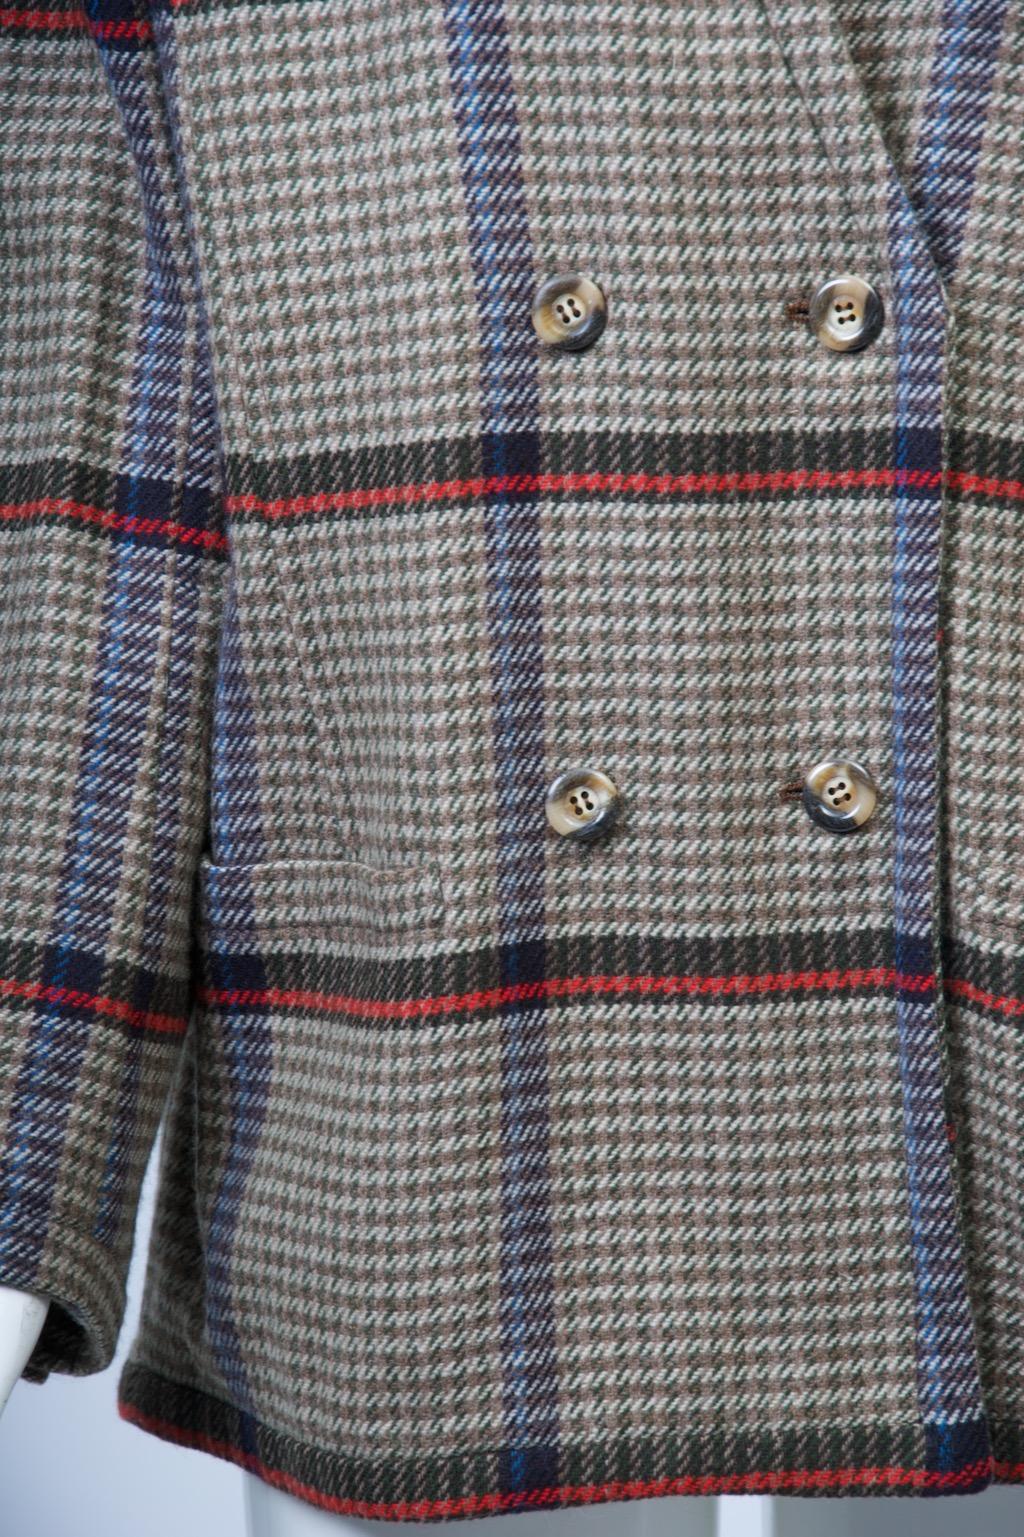 Valentino jacket in soft wool plaid, the small check ground primarily in tan, ivory and olive green punctuated by horizontal bands in brown and red and thin vertical bands in brown and blue. The jacket features a double-breasted straight cut with a